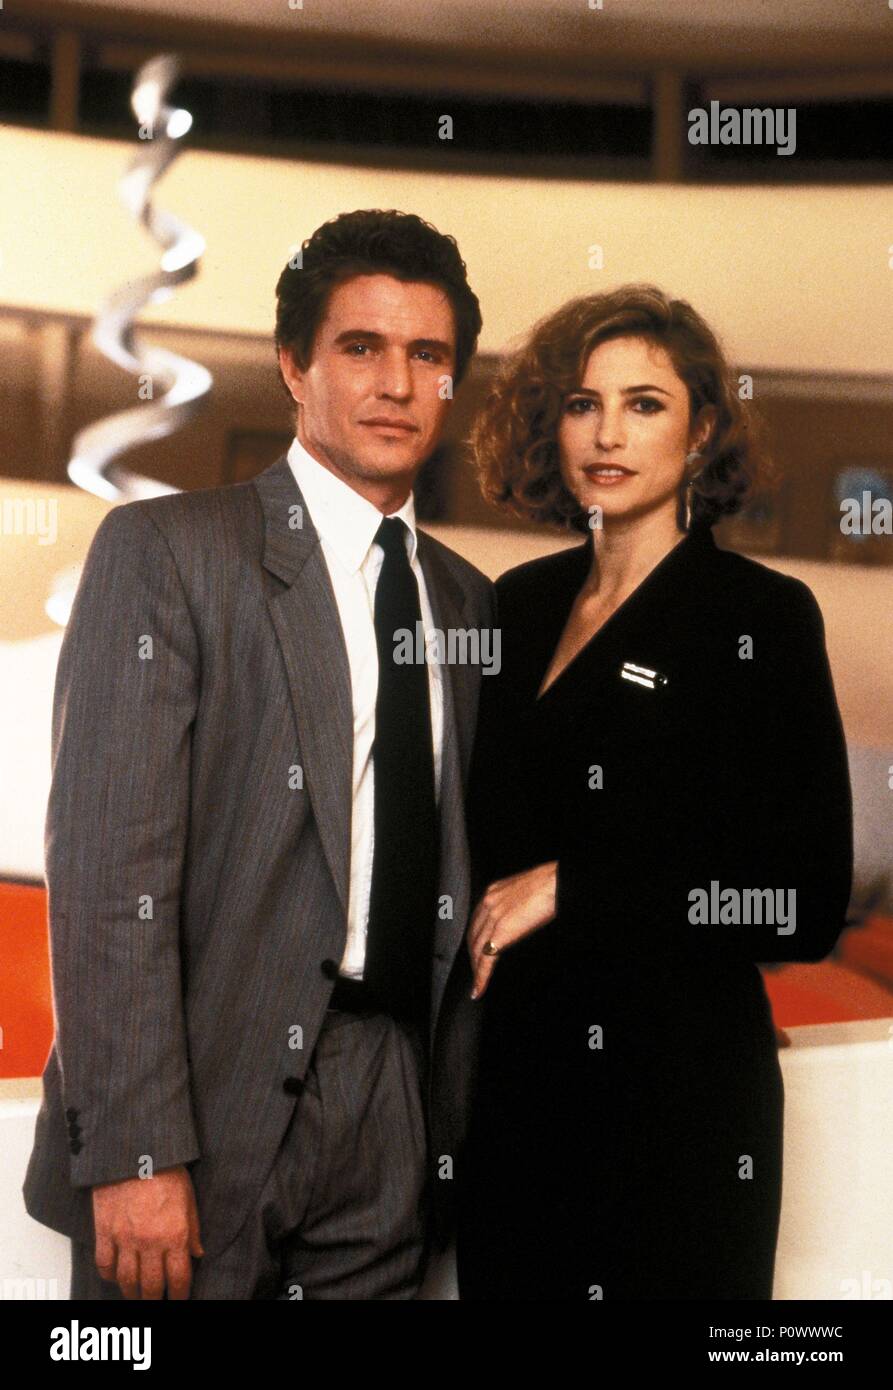 Original Film Title: SOMEONE TO WATCH OVER ME.  English Title: SOMEONE TO WATCH OVER ME.  Film Director: RIDLEY SCOTT.  Year: 1987.  Stars: MIMI ROGERS; TOM BERENGER. Credit: COLUMBIA PICTURES / Album Stock Photo